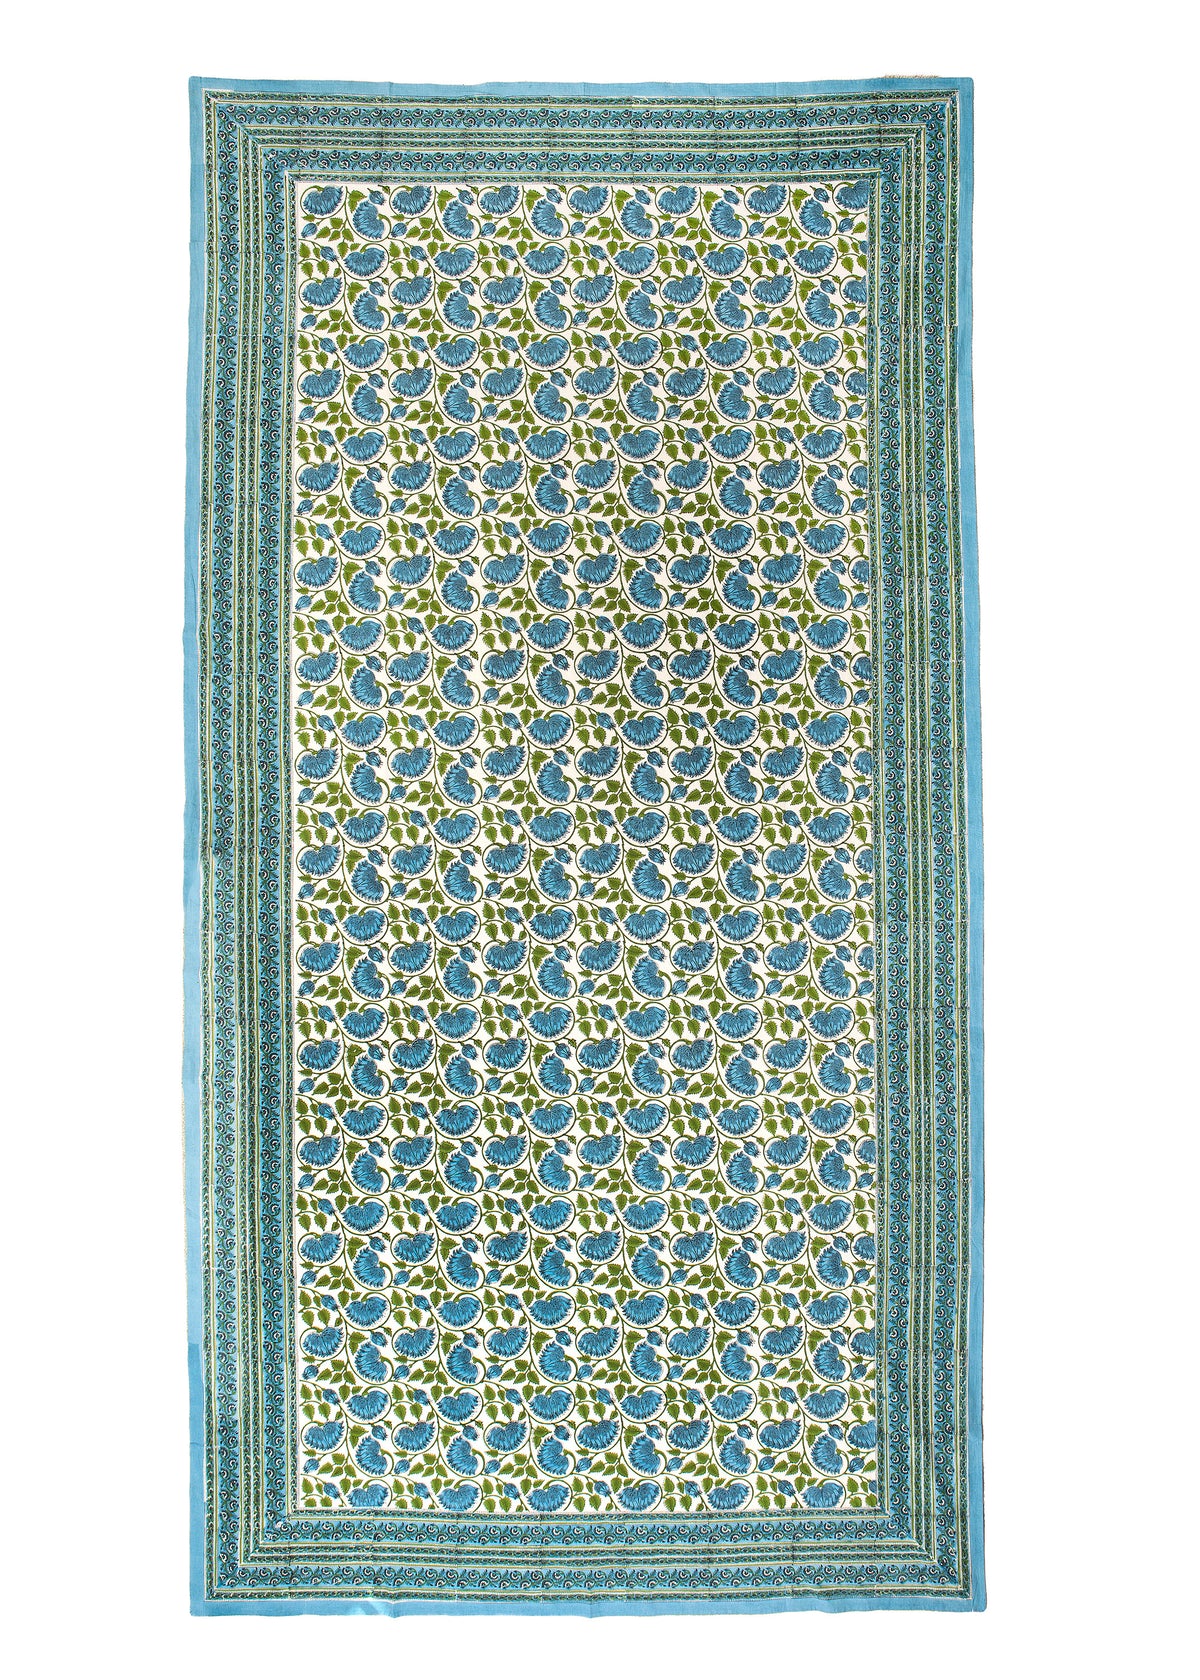 Block Print Rectangular Table Cloth in Blue and Green 72" x 132"